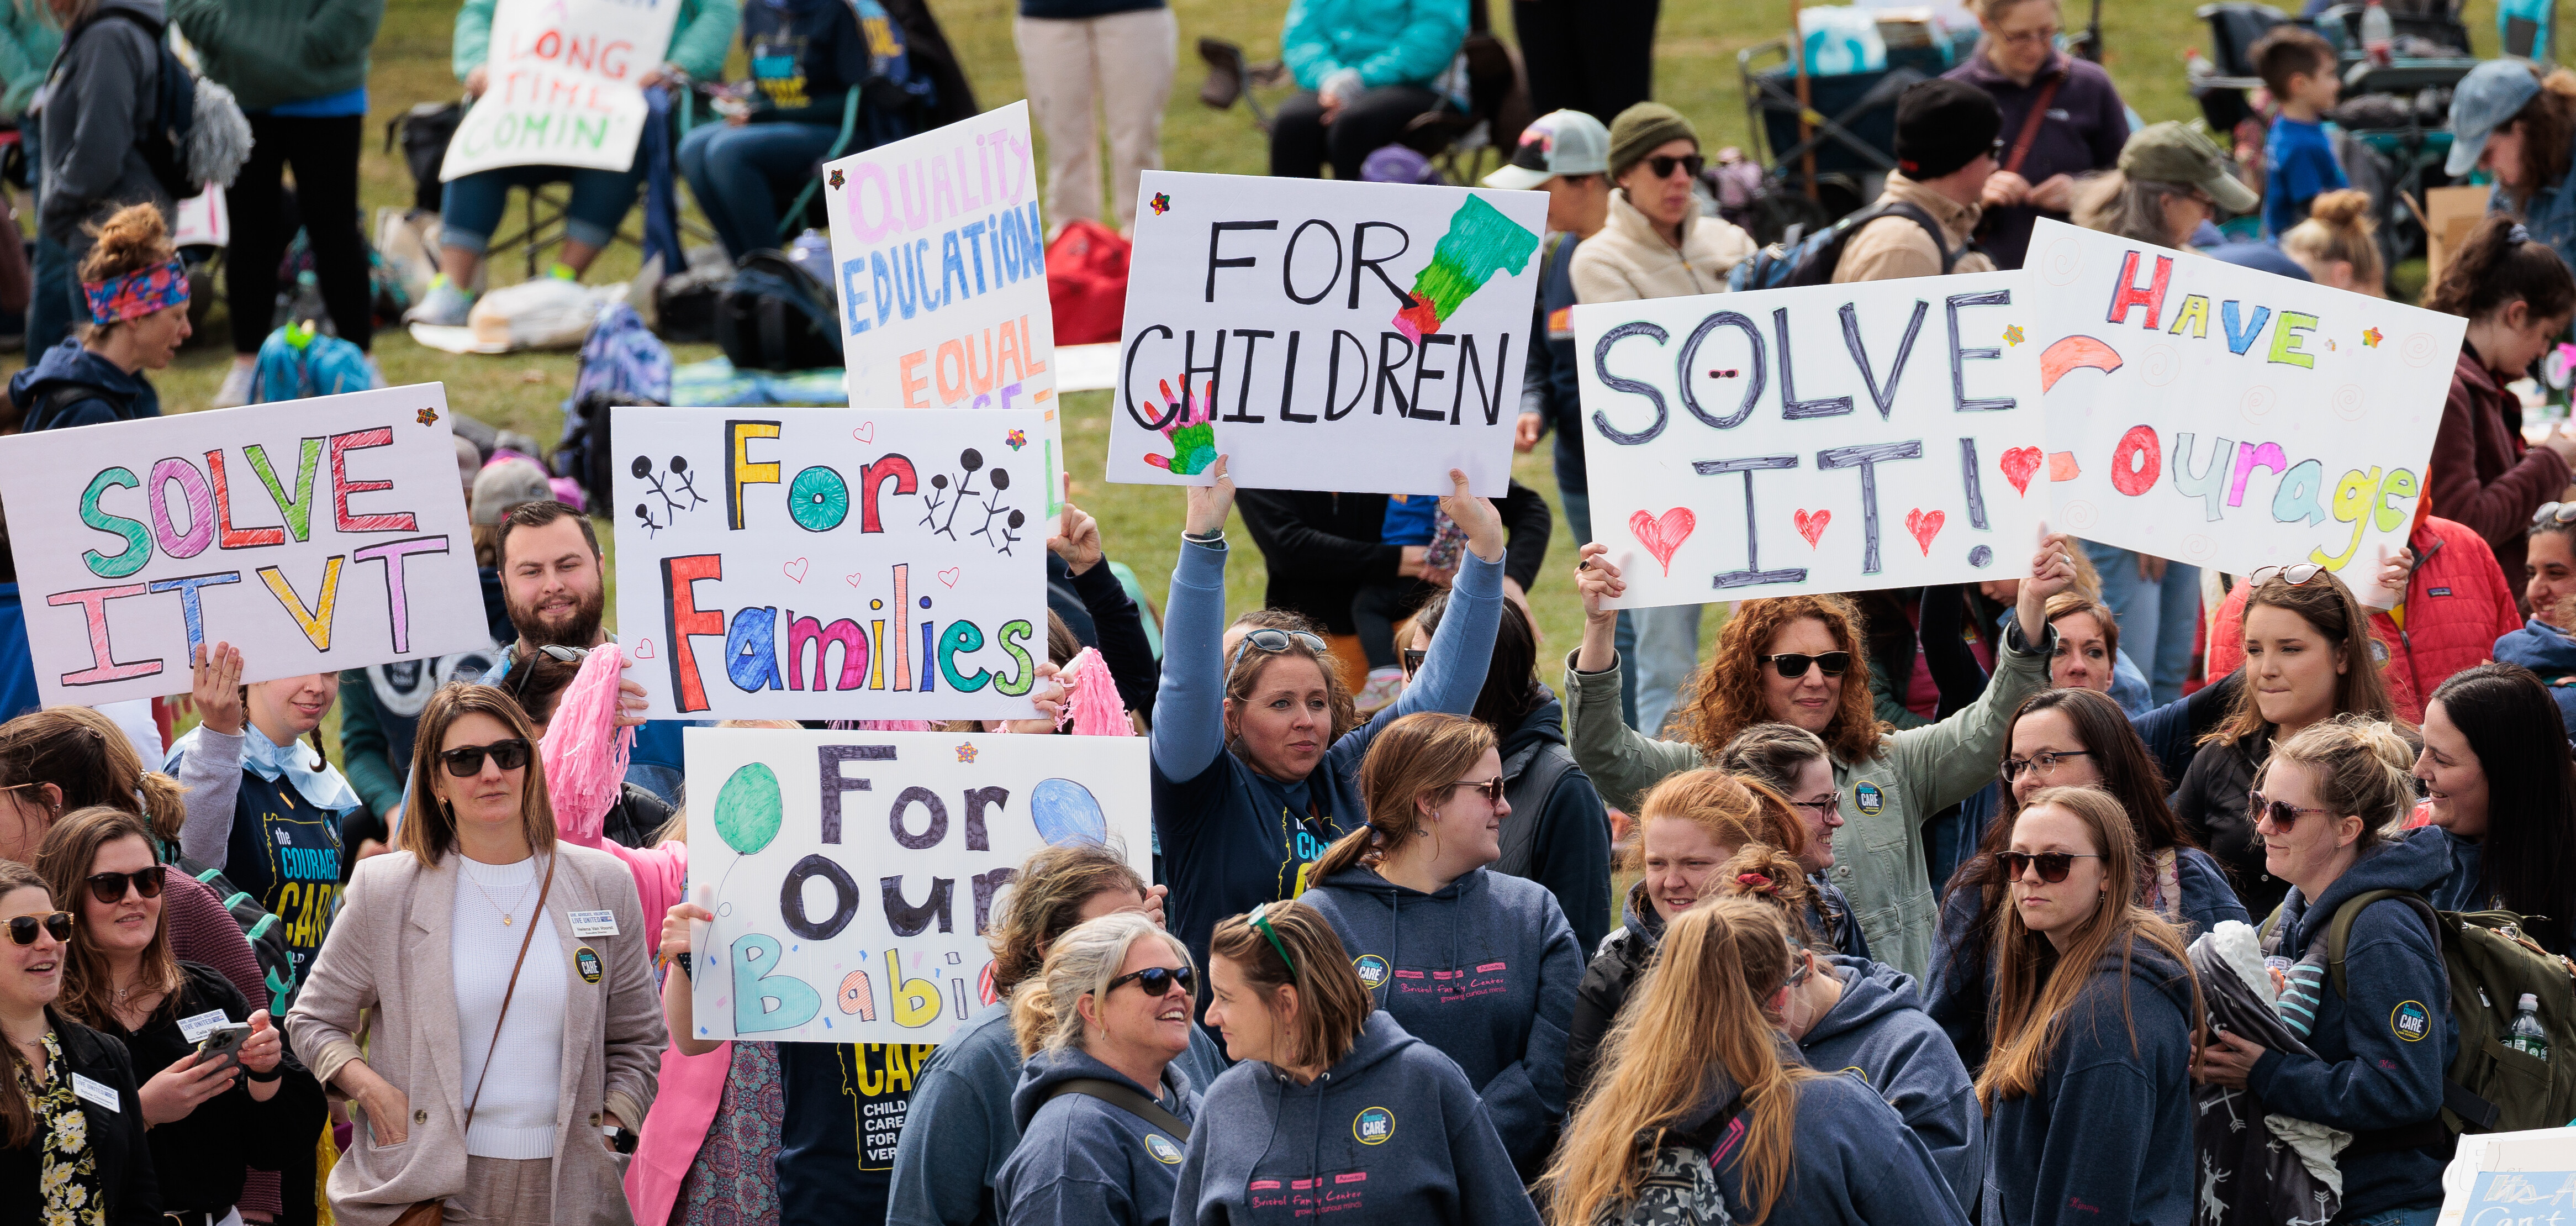 Rally-goers hold up signs to show support for the Vermont's Child Care Bill.